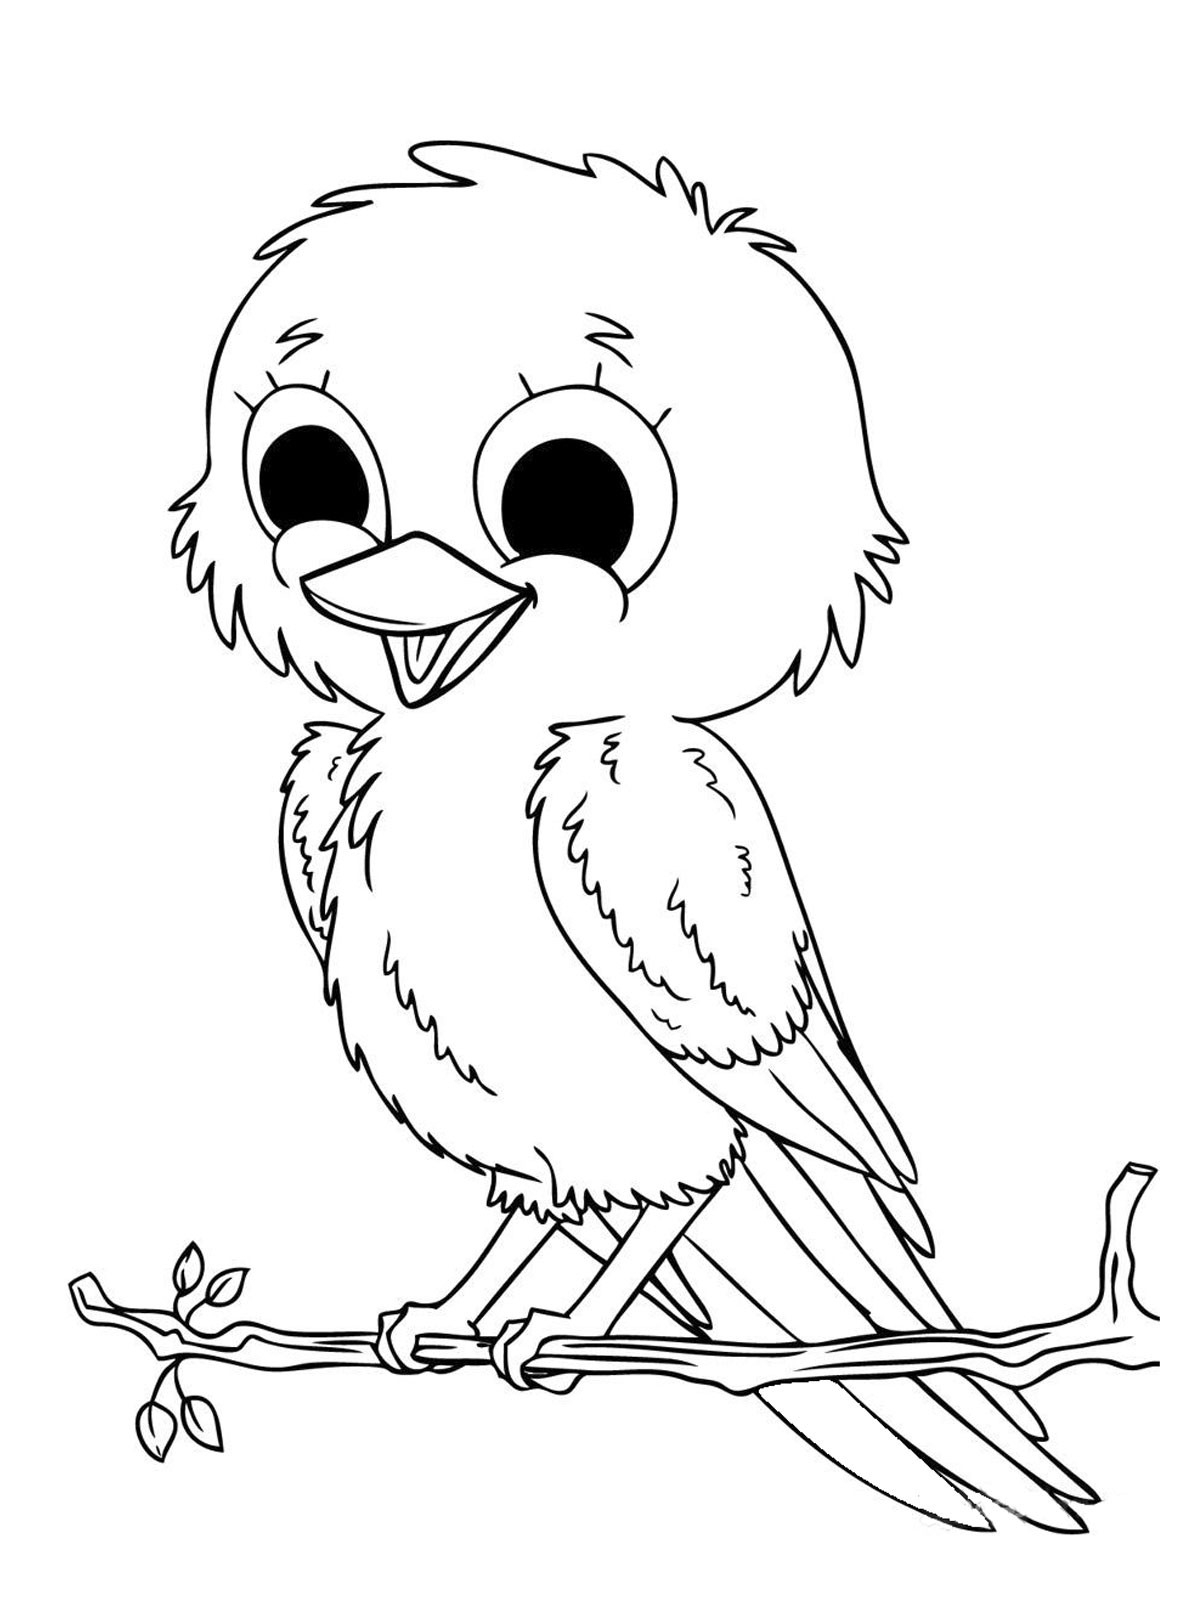 Luxury Free Coloring Pages Of Baby Animals | Www.pantry-Magic - Free Printable Pictures Of Baby Animals